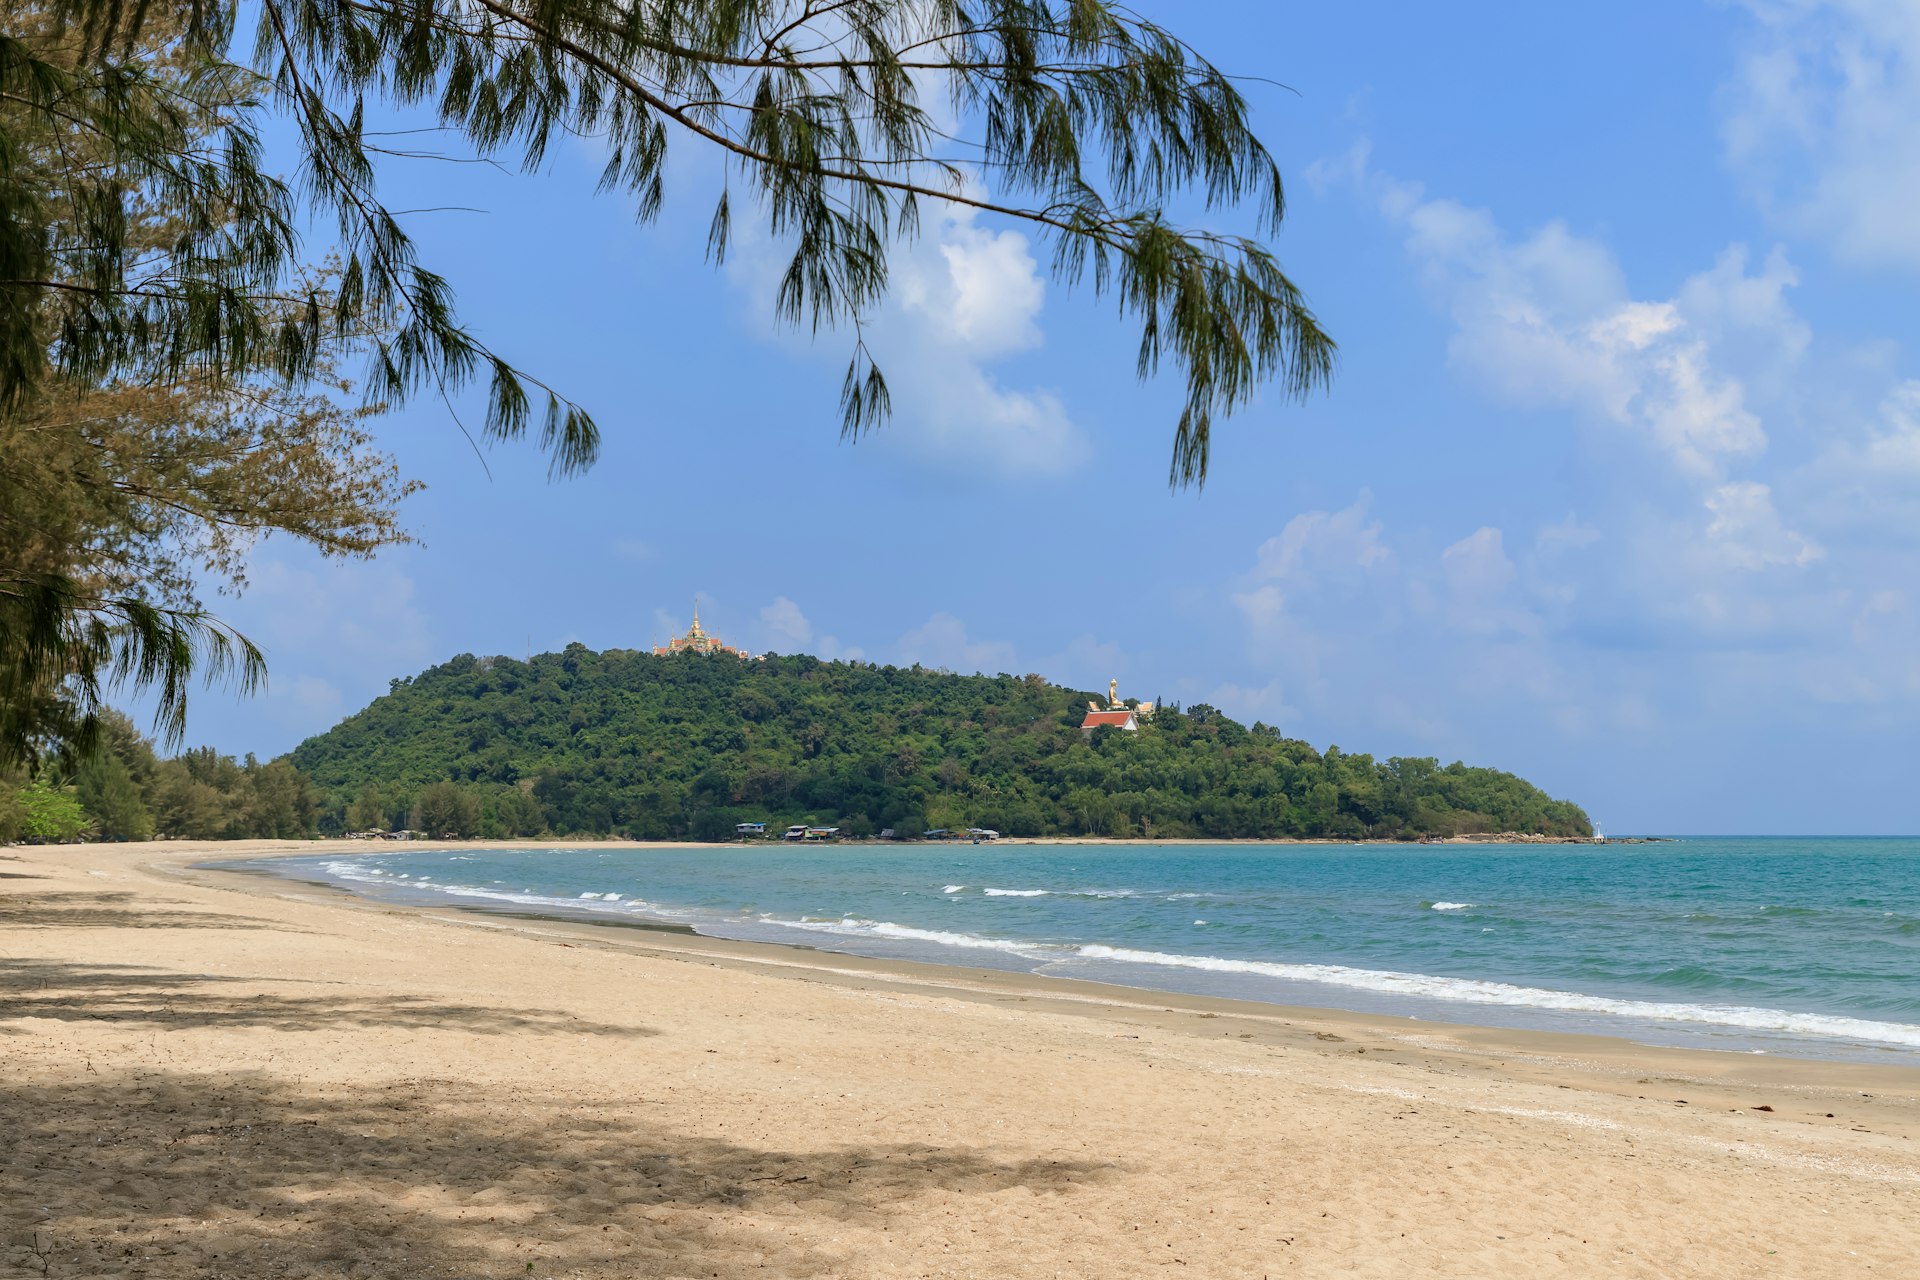 A beach landscape showing a forested island with a prominent building at the top of a hill, viewed from a sandy shore under the shade of an overhanging tree branch.